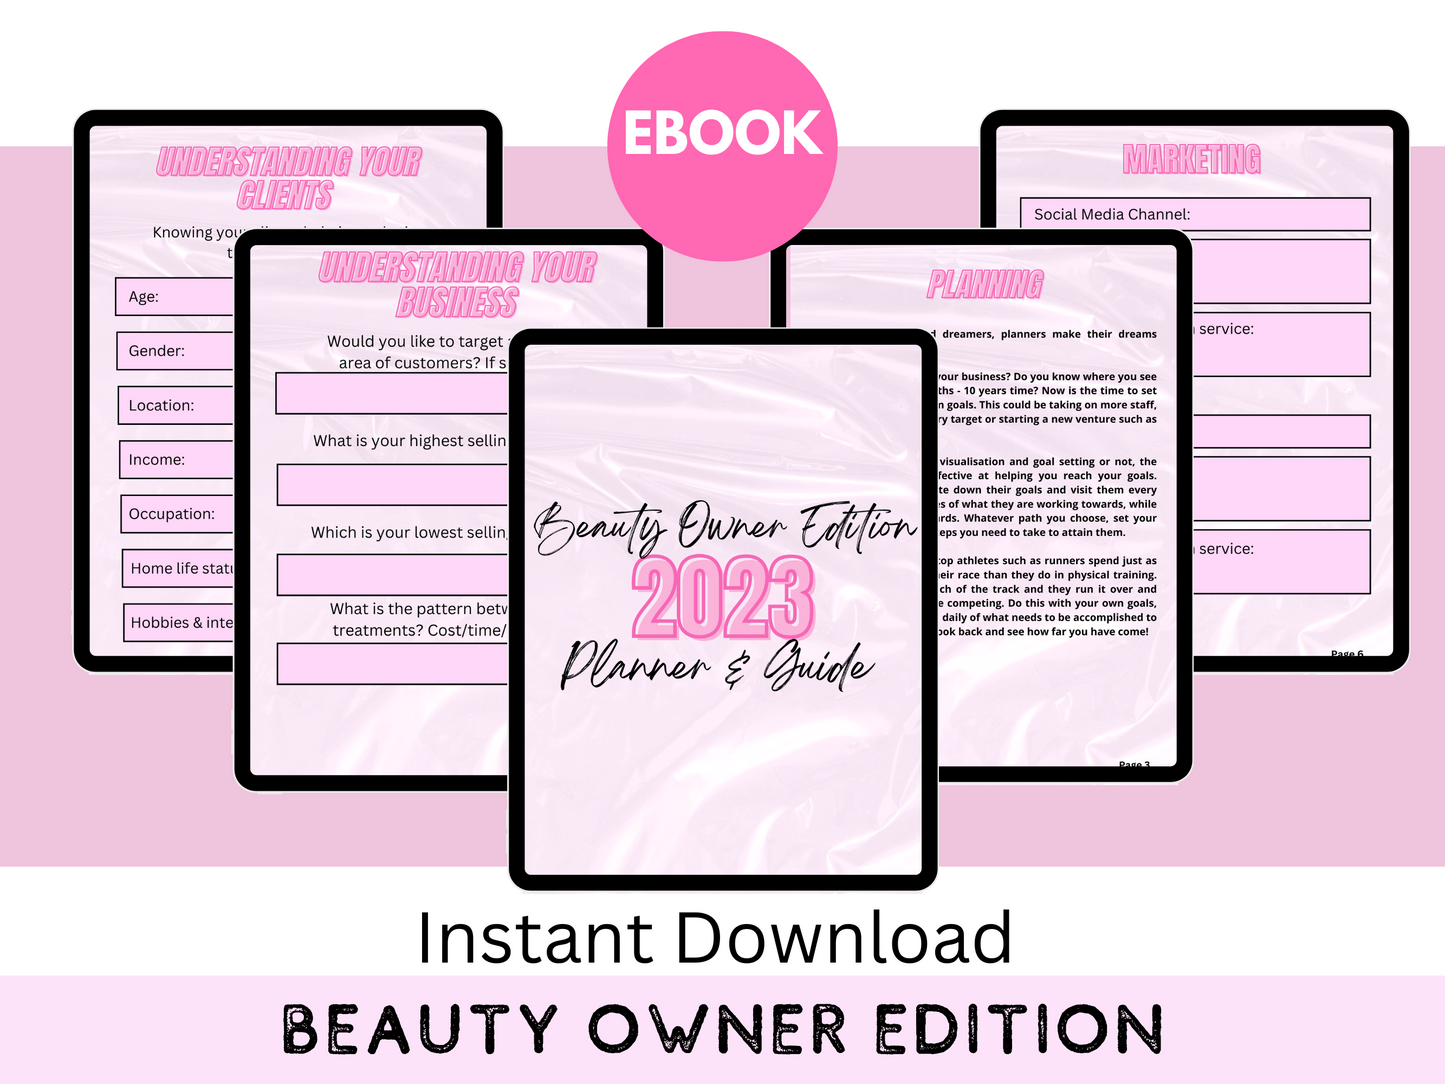 Beauty Business 2023 Planner and Guide